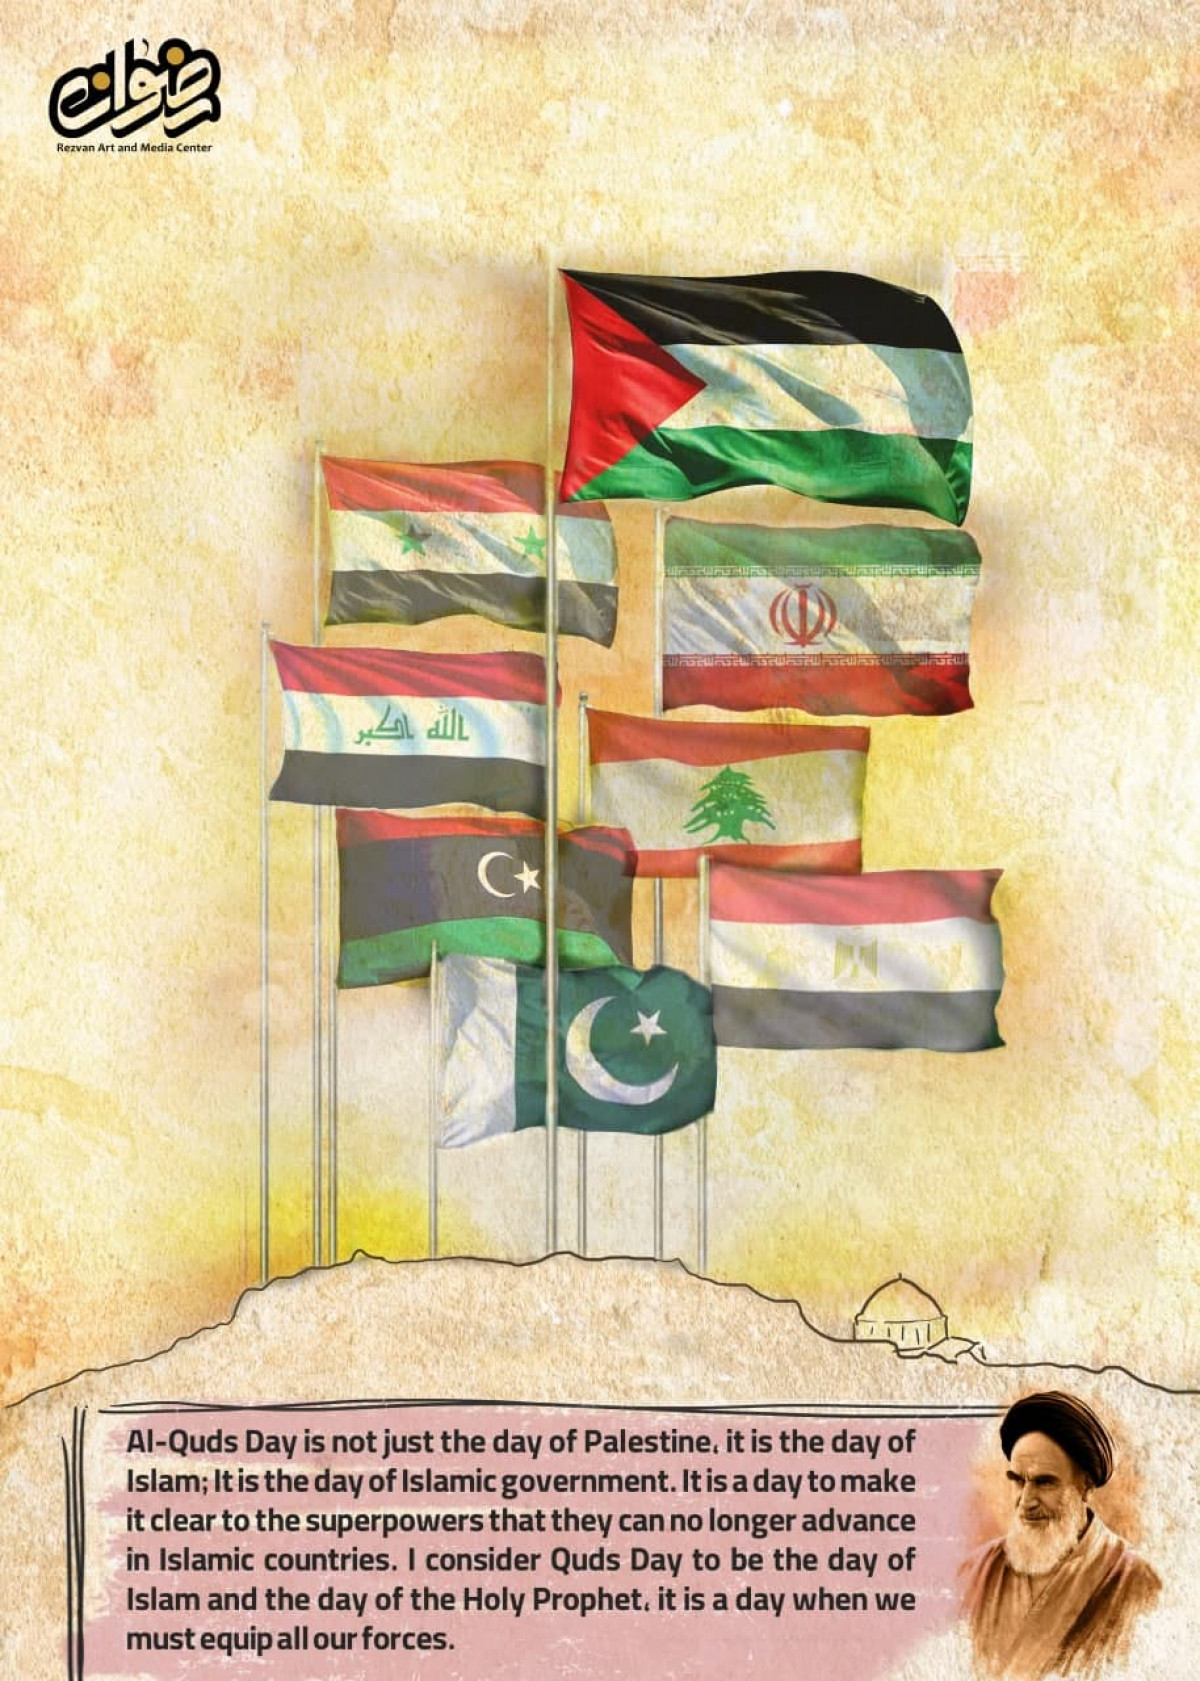 Al-Quds Day is not just the day of Palestine